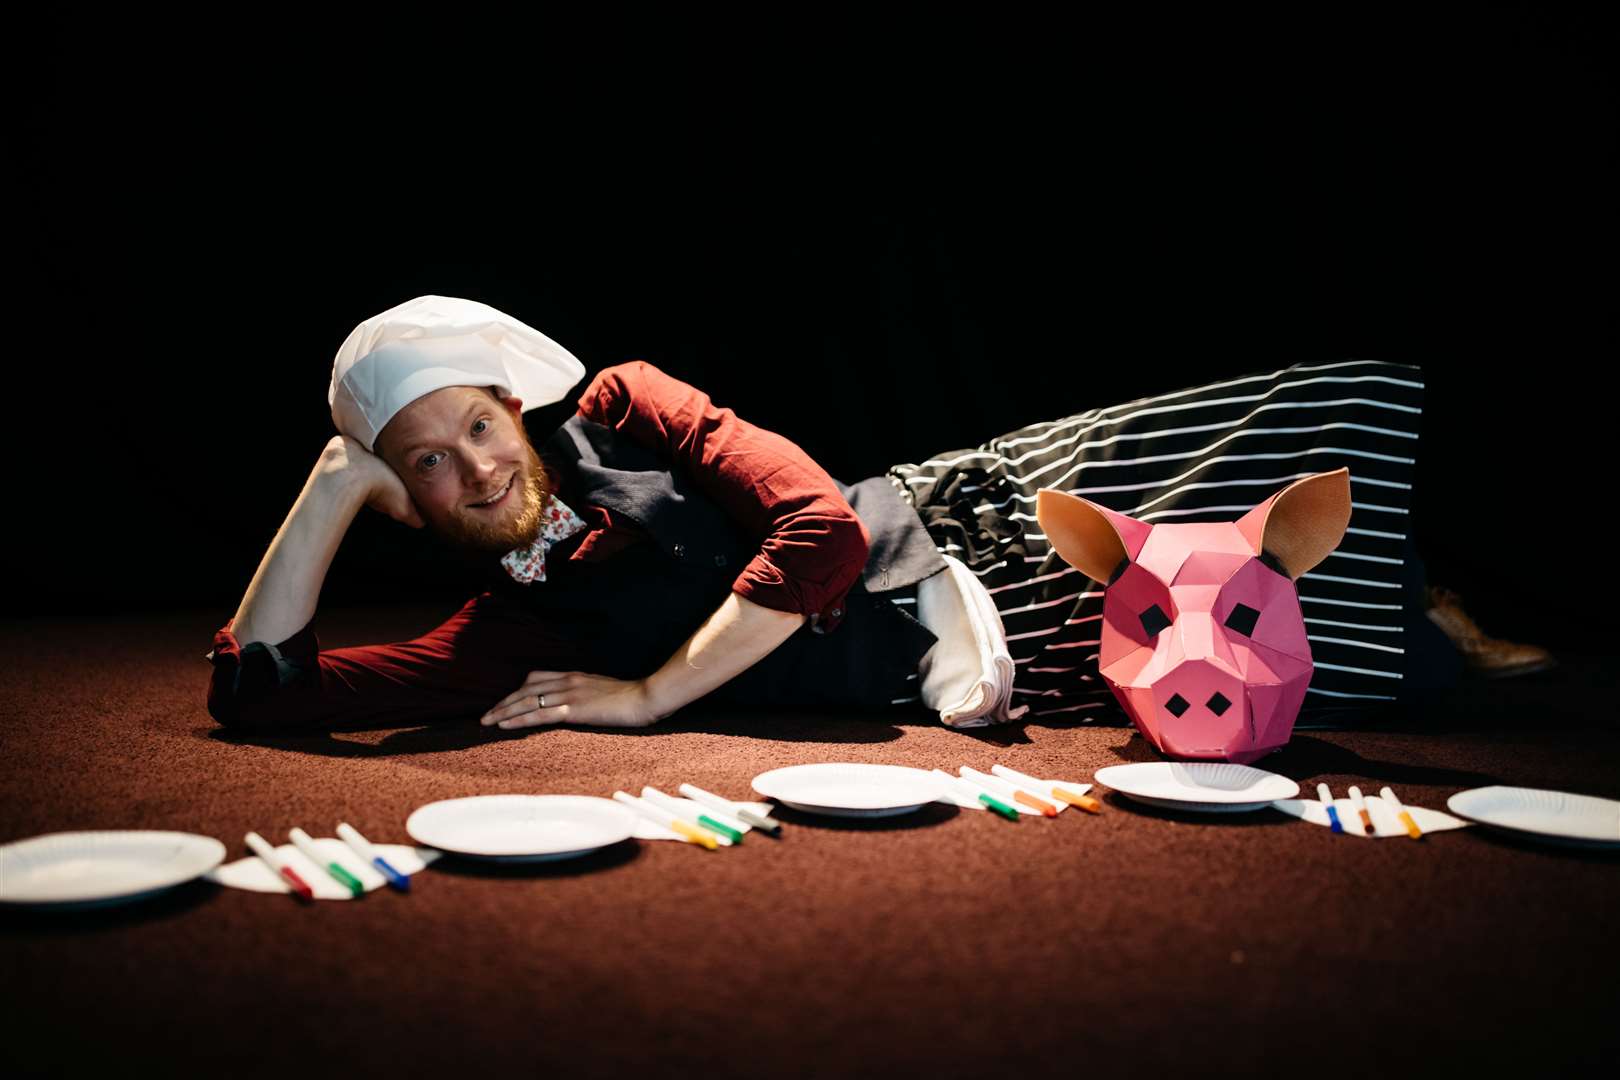 Feast of Fools is described as a catastrophic culinary adventure for families.